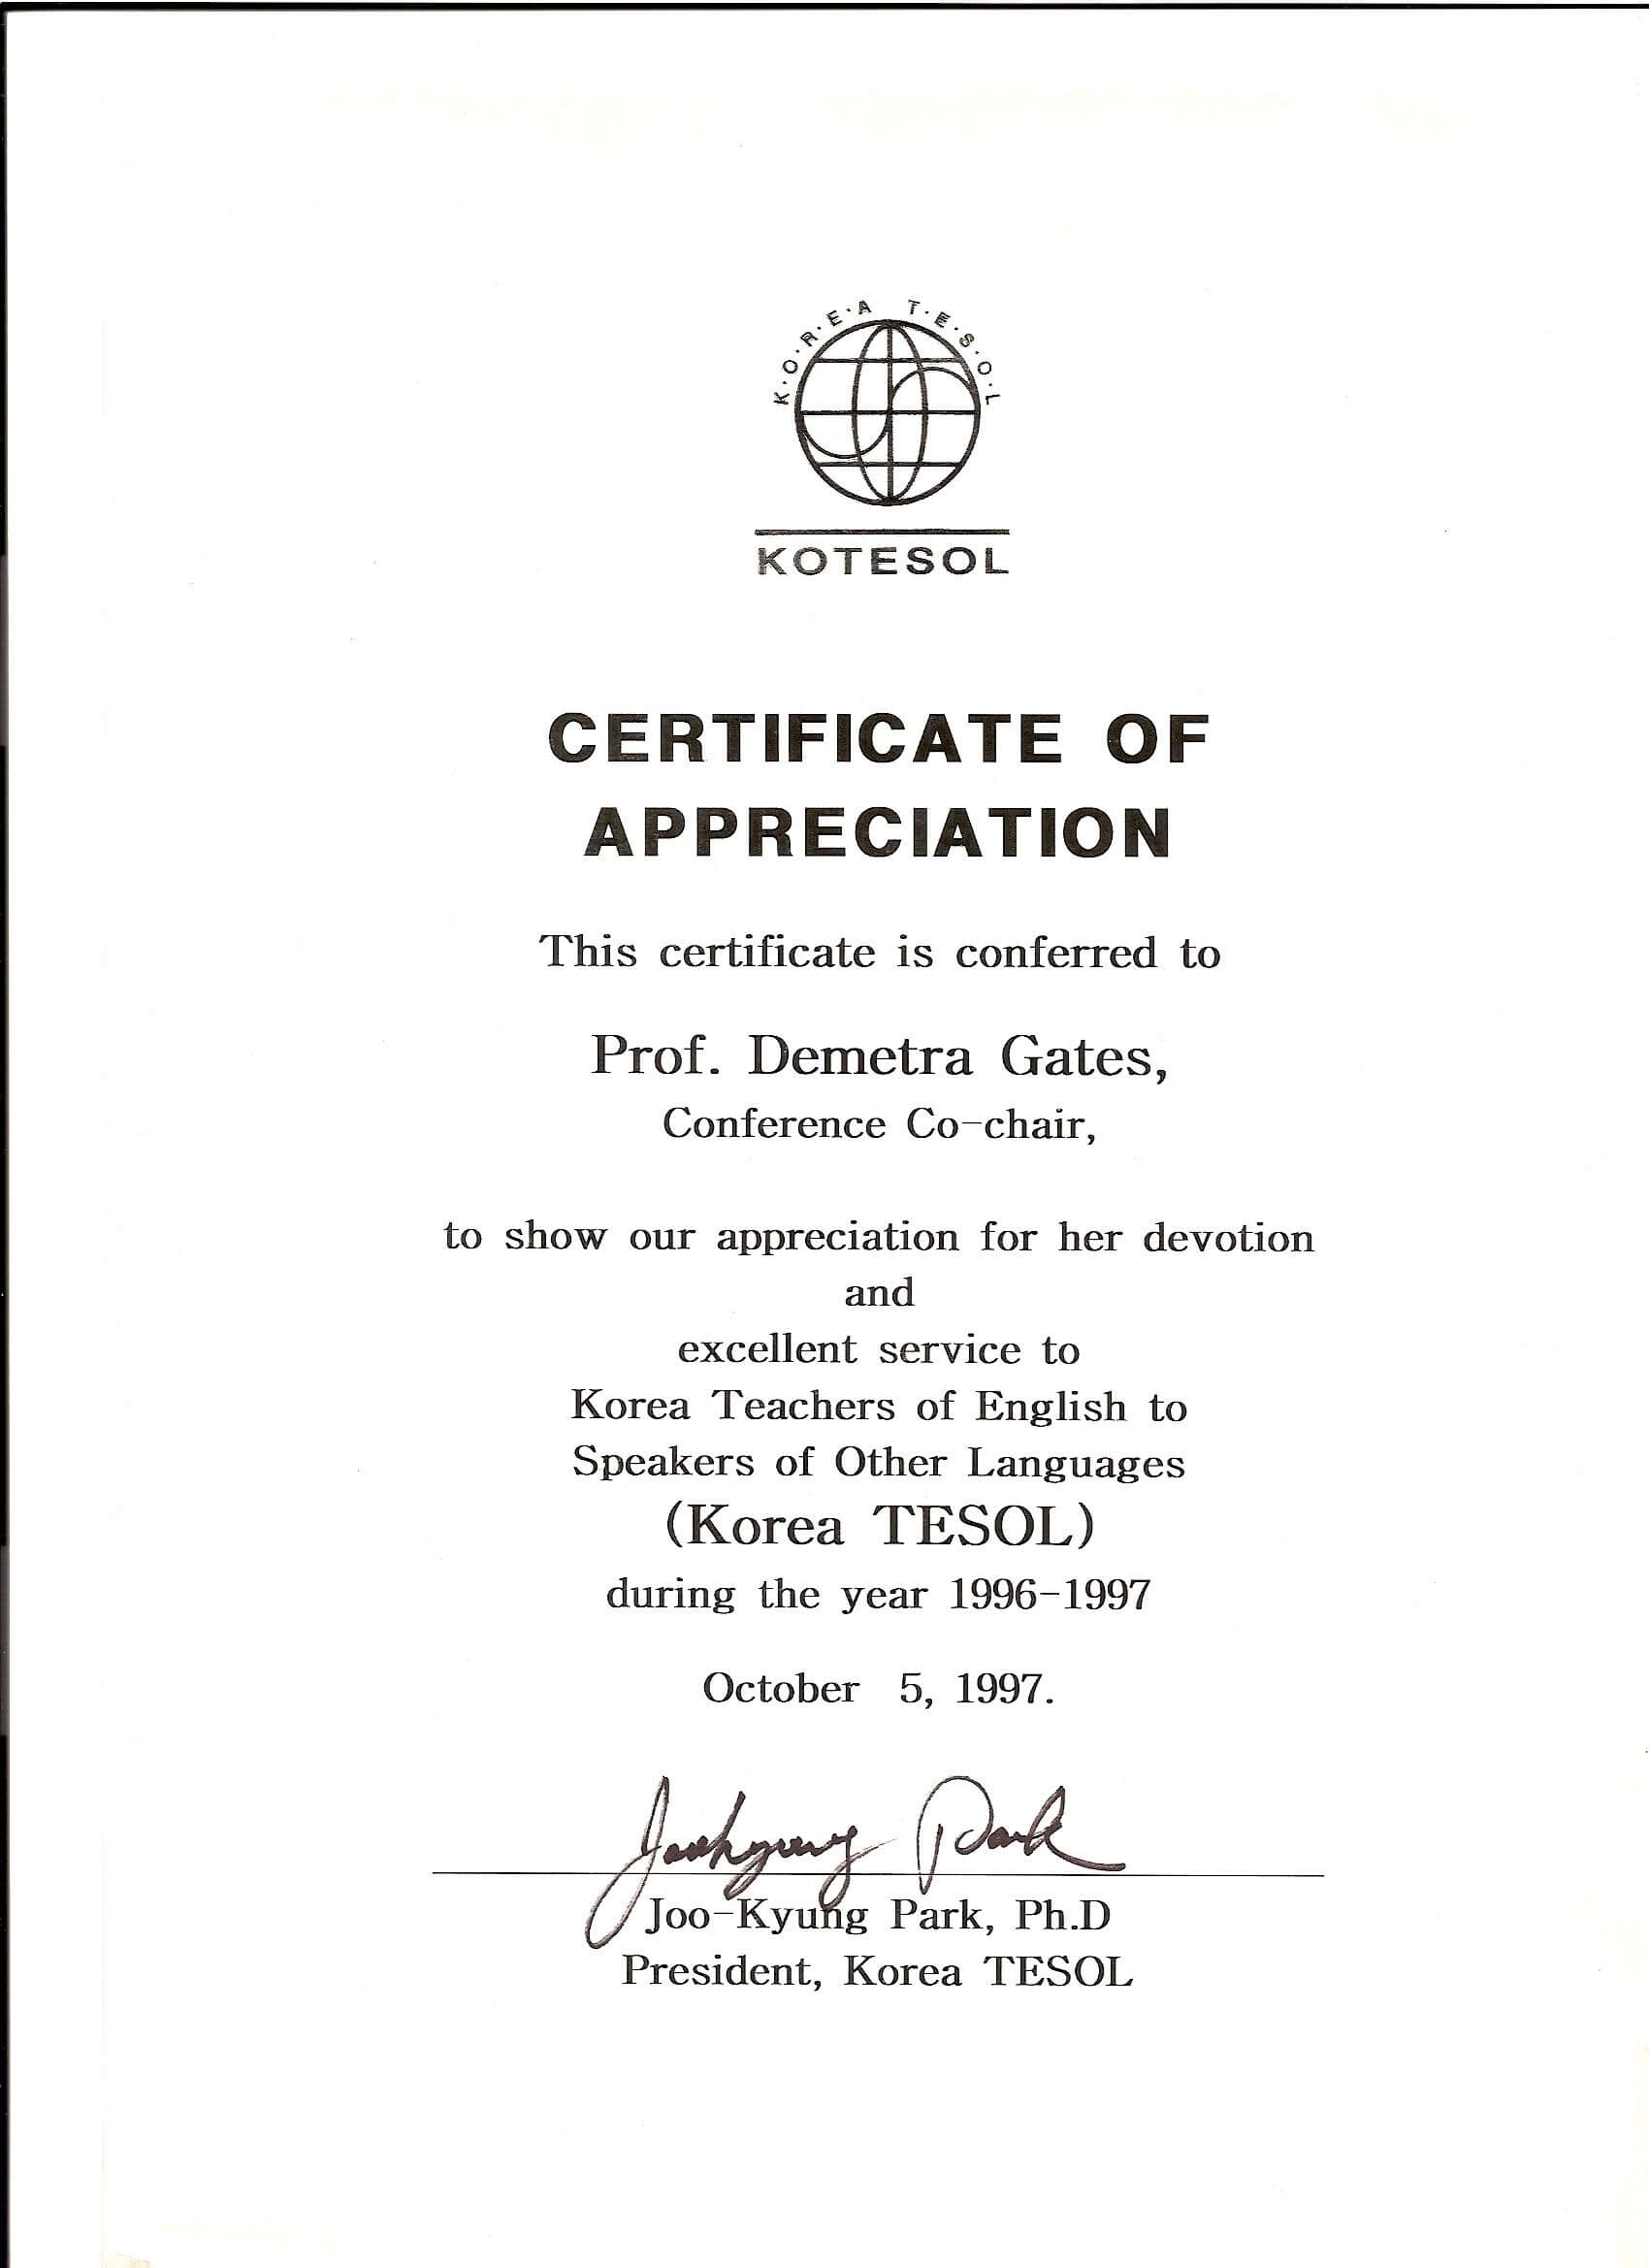 Kotesol Presidential Certificate Of Appreciation (1997 Within Certificate For Years Of Service Template